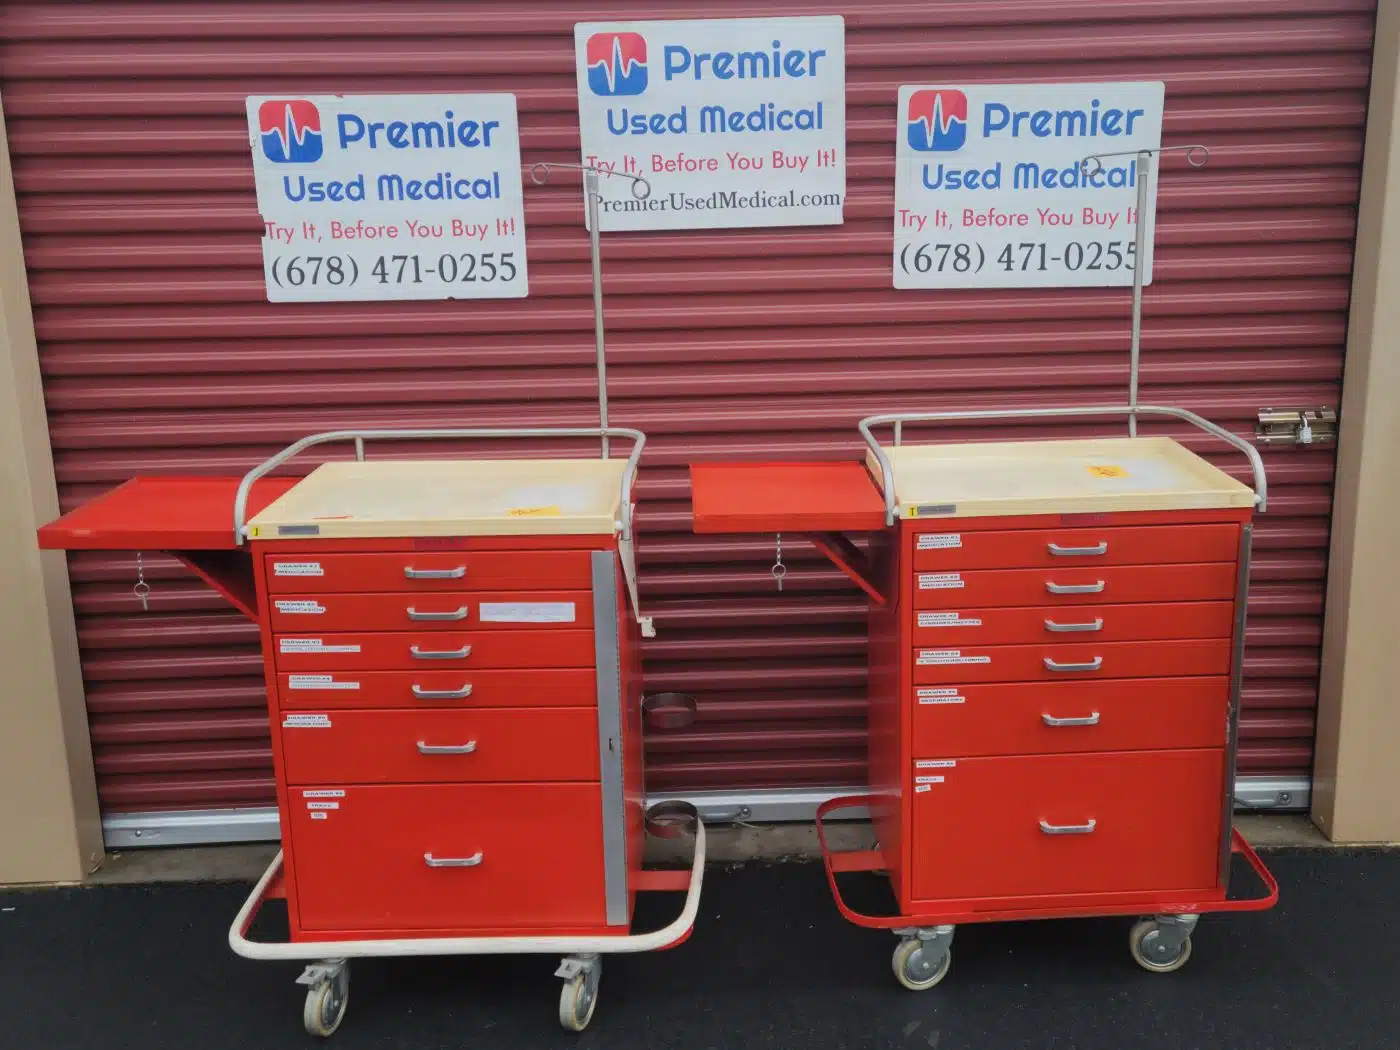 https://premierusedmedical.com/wp-content/uploads/2022/07/New-Pic-Assorted-Red-Crash-Carts-Waterloo_-Blue-Bell_-and-MPD-Brand-_895.jpg.webp